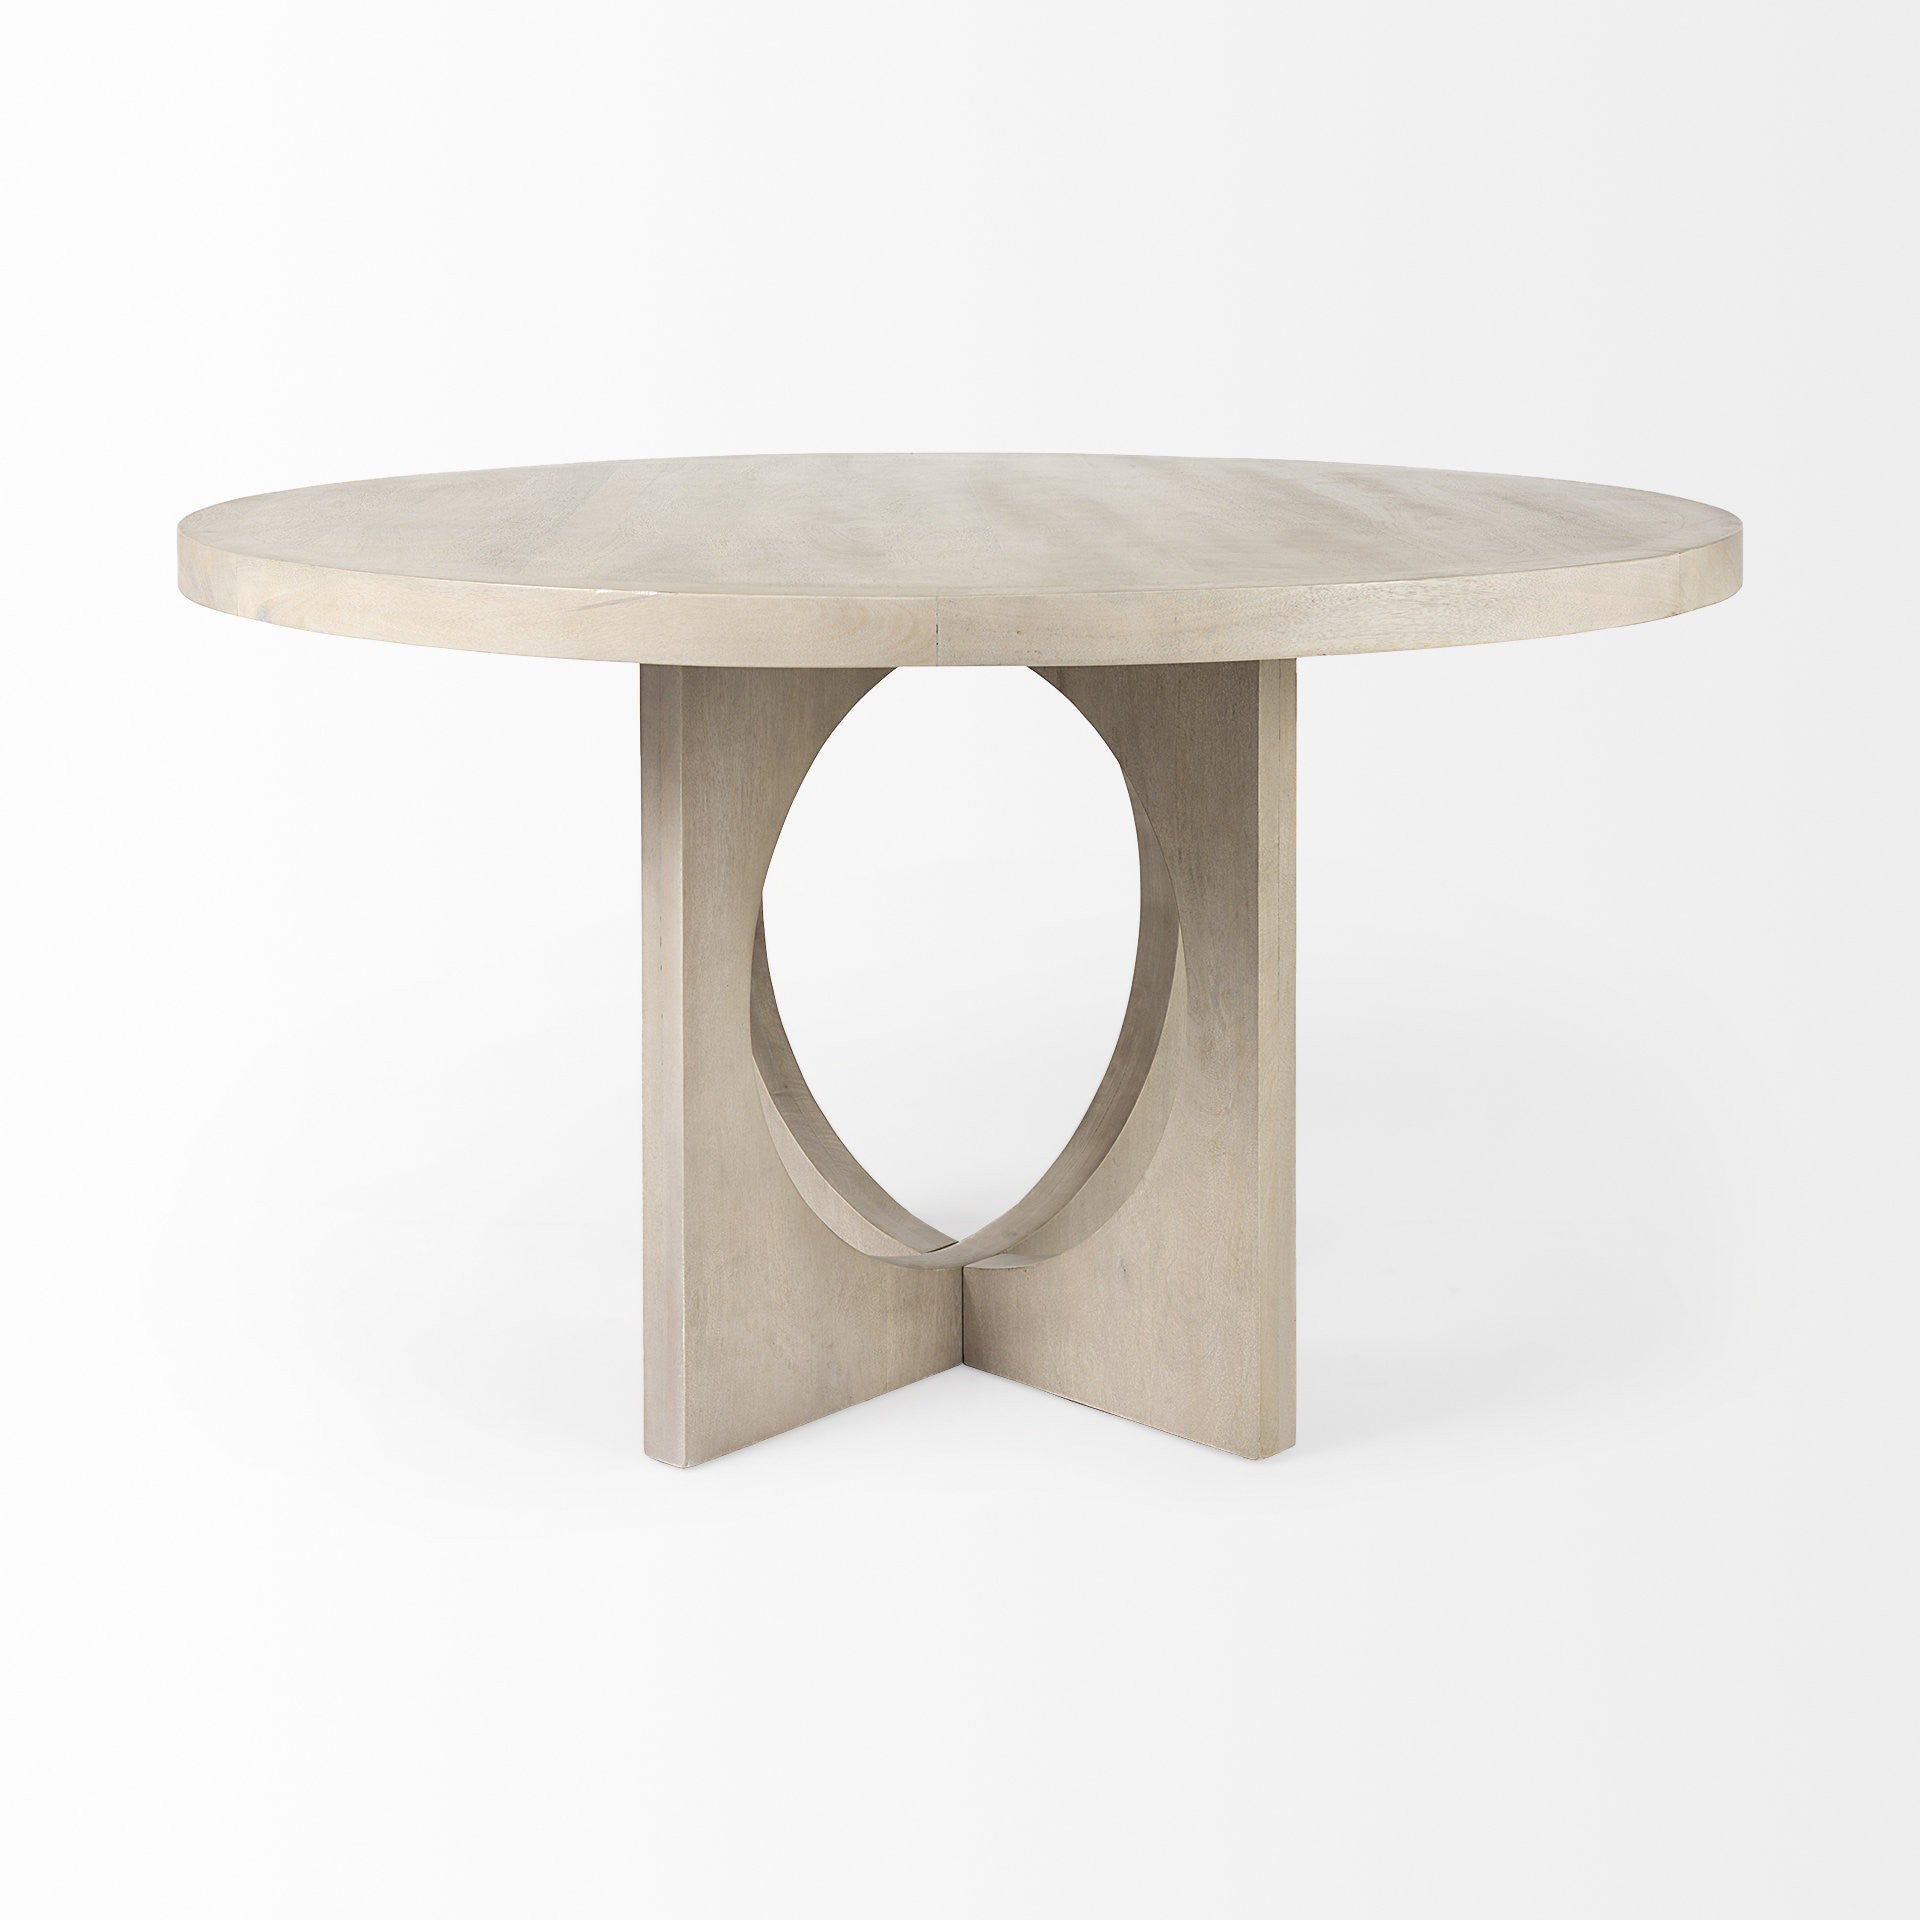 Light Natural Wood Round Geometric Dining Table-2